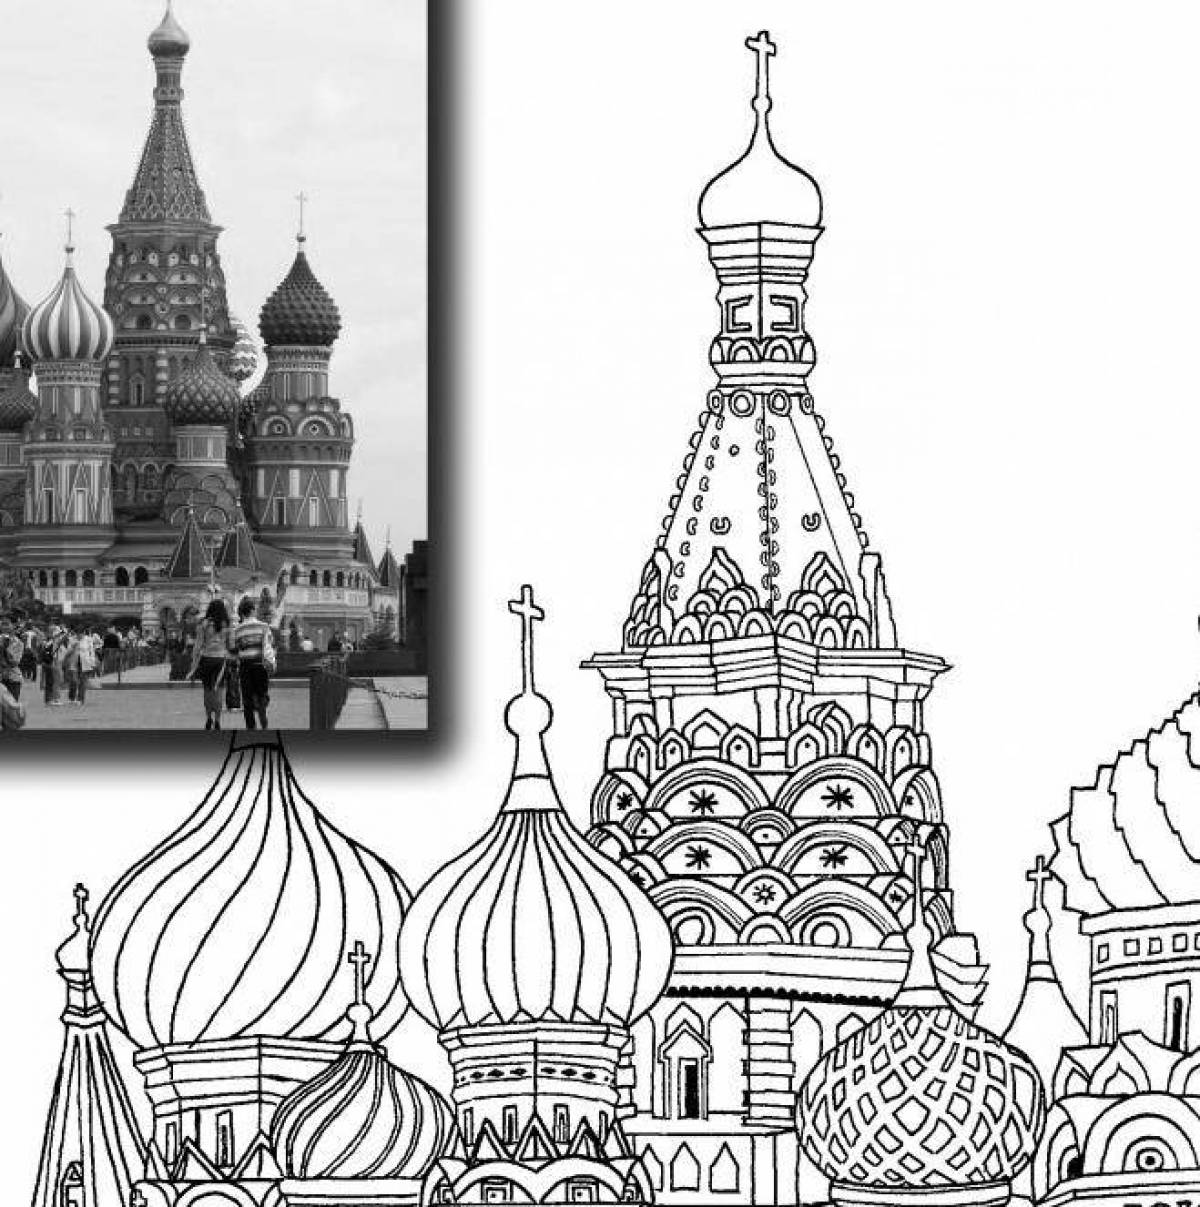 Coloring page immaculate st basil's church